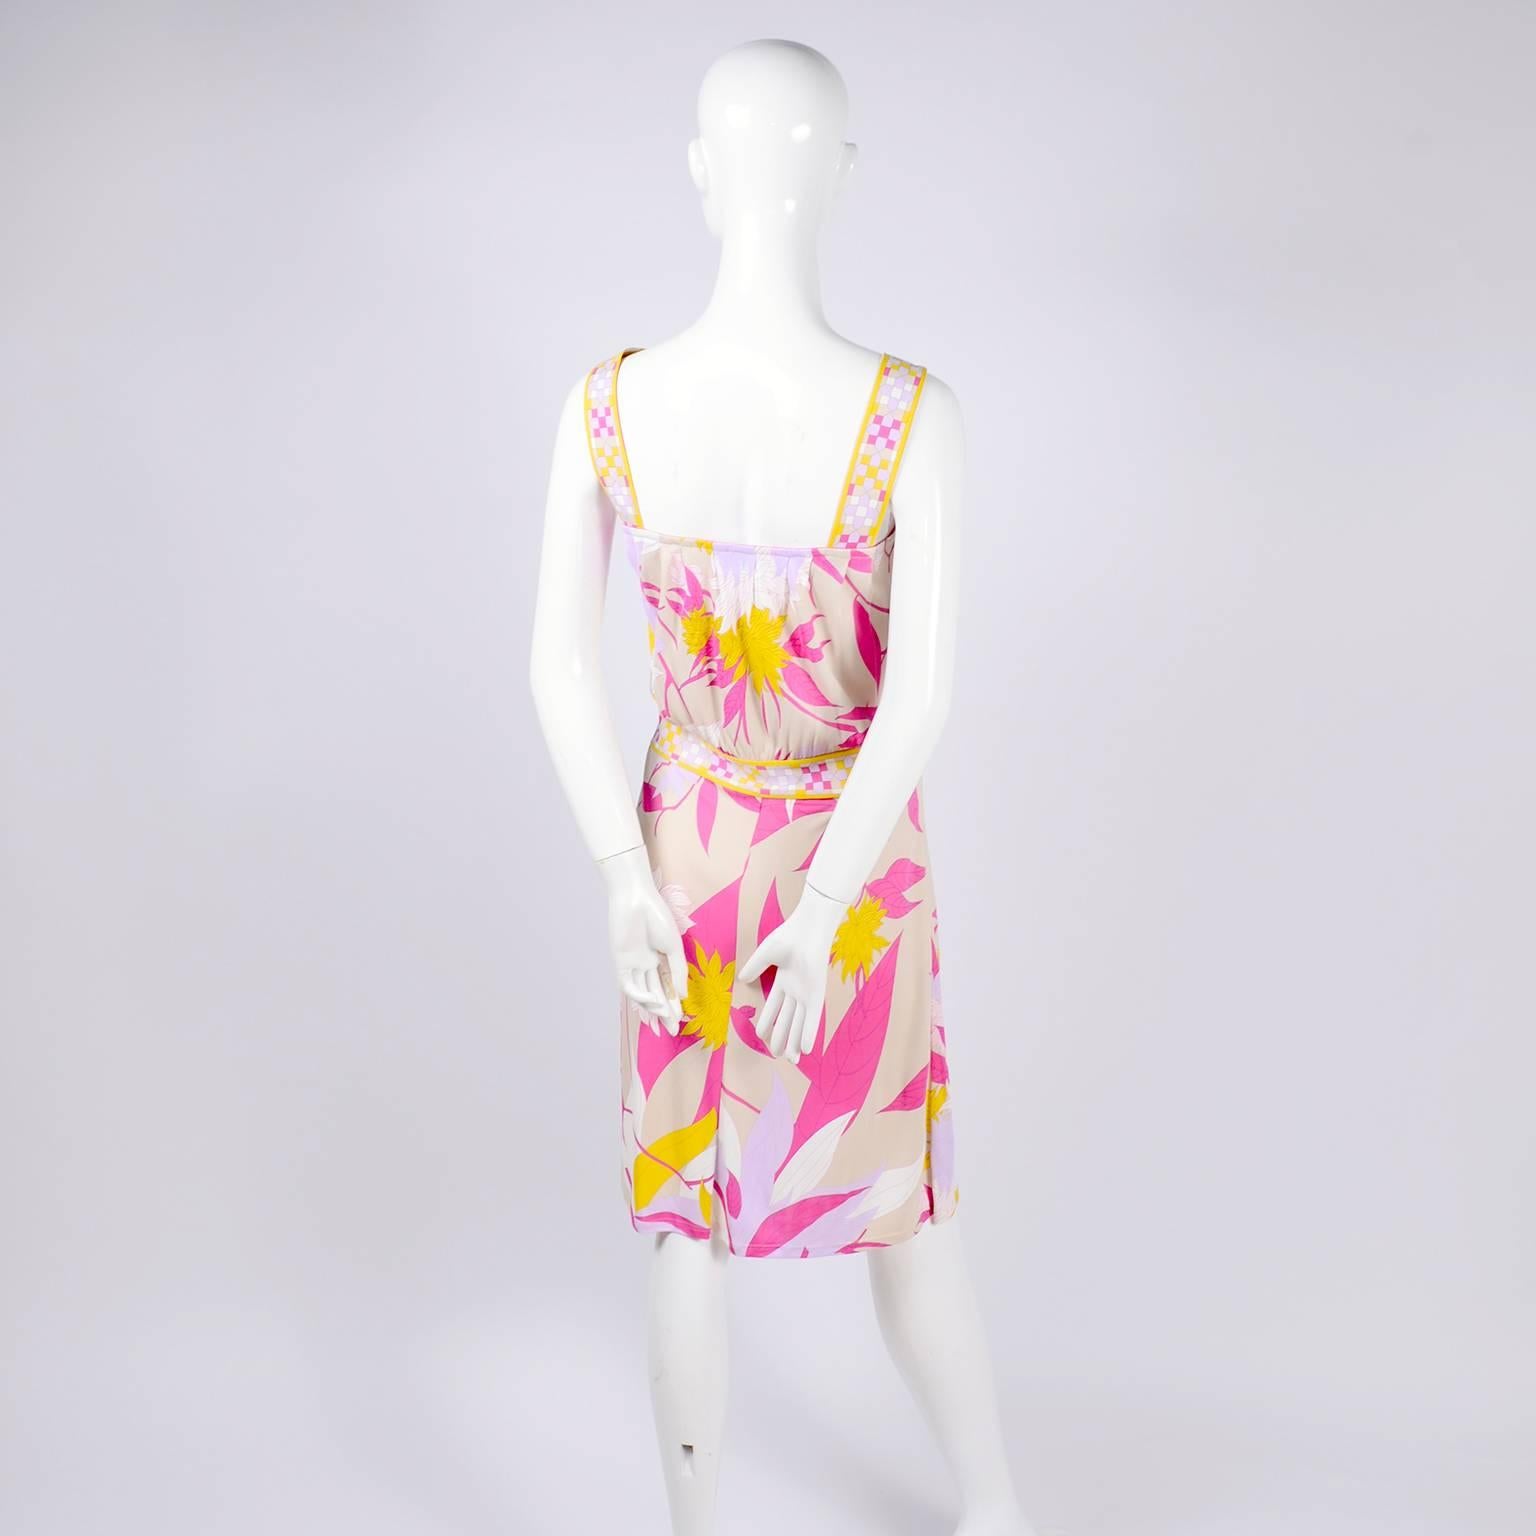 Women's or Men's Pucci Rayon Jersey Leaf Floral Print Dress in Pink Cream Yellow and Lavender 10